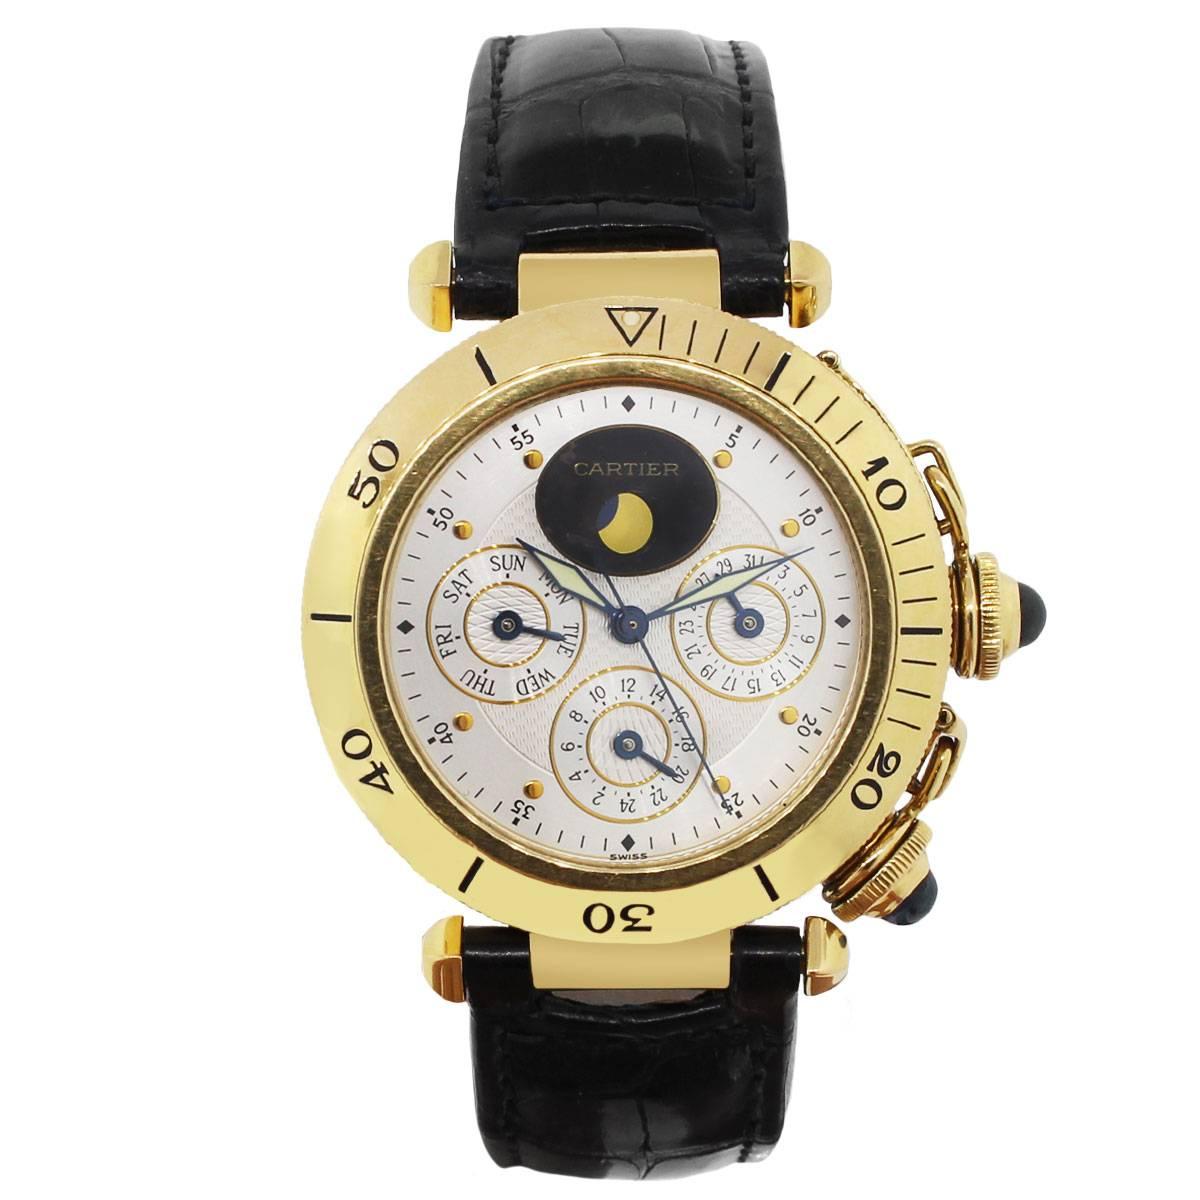 Brand: Cartier
MPN: MG246506
Model: GMT Pasha Day Date
Case Material: 18k yellow gold
Case Diameter: 38mm
Crystal: Sapphire crystal (scratch resistant)
Bezel: 18k yellow gold unidirectional bezel
Dial: Ivory dial with 3 sub dials. Moon-phase at 12